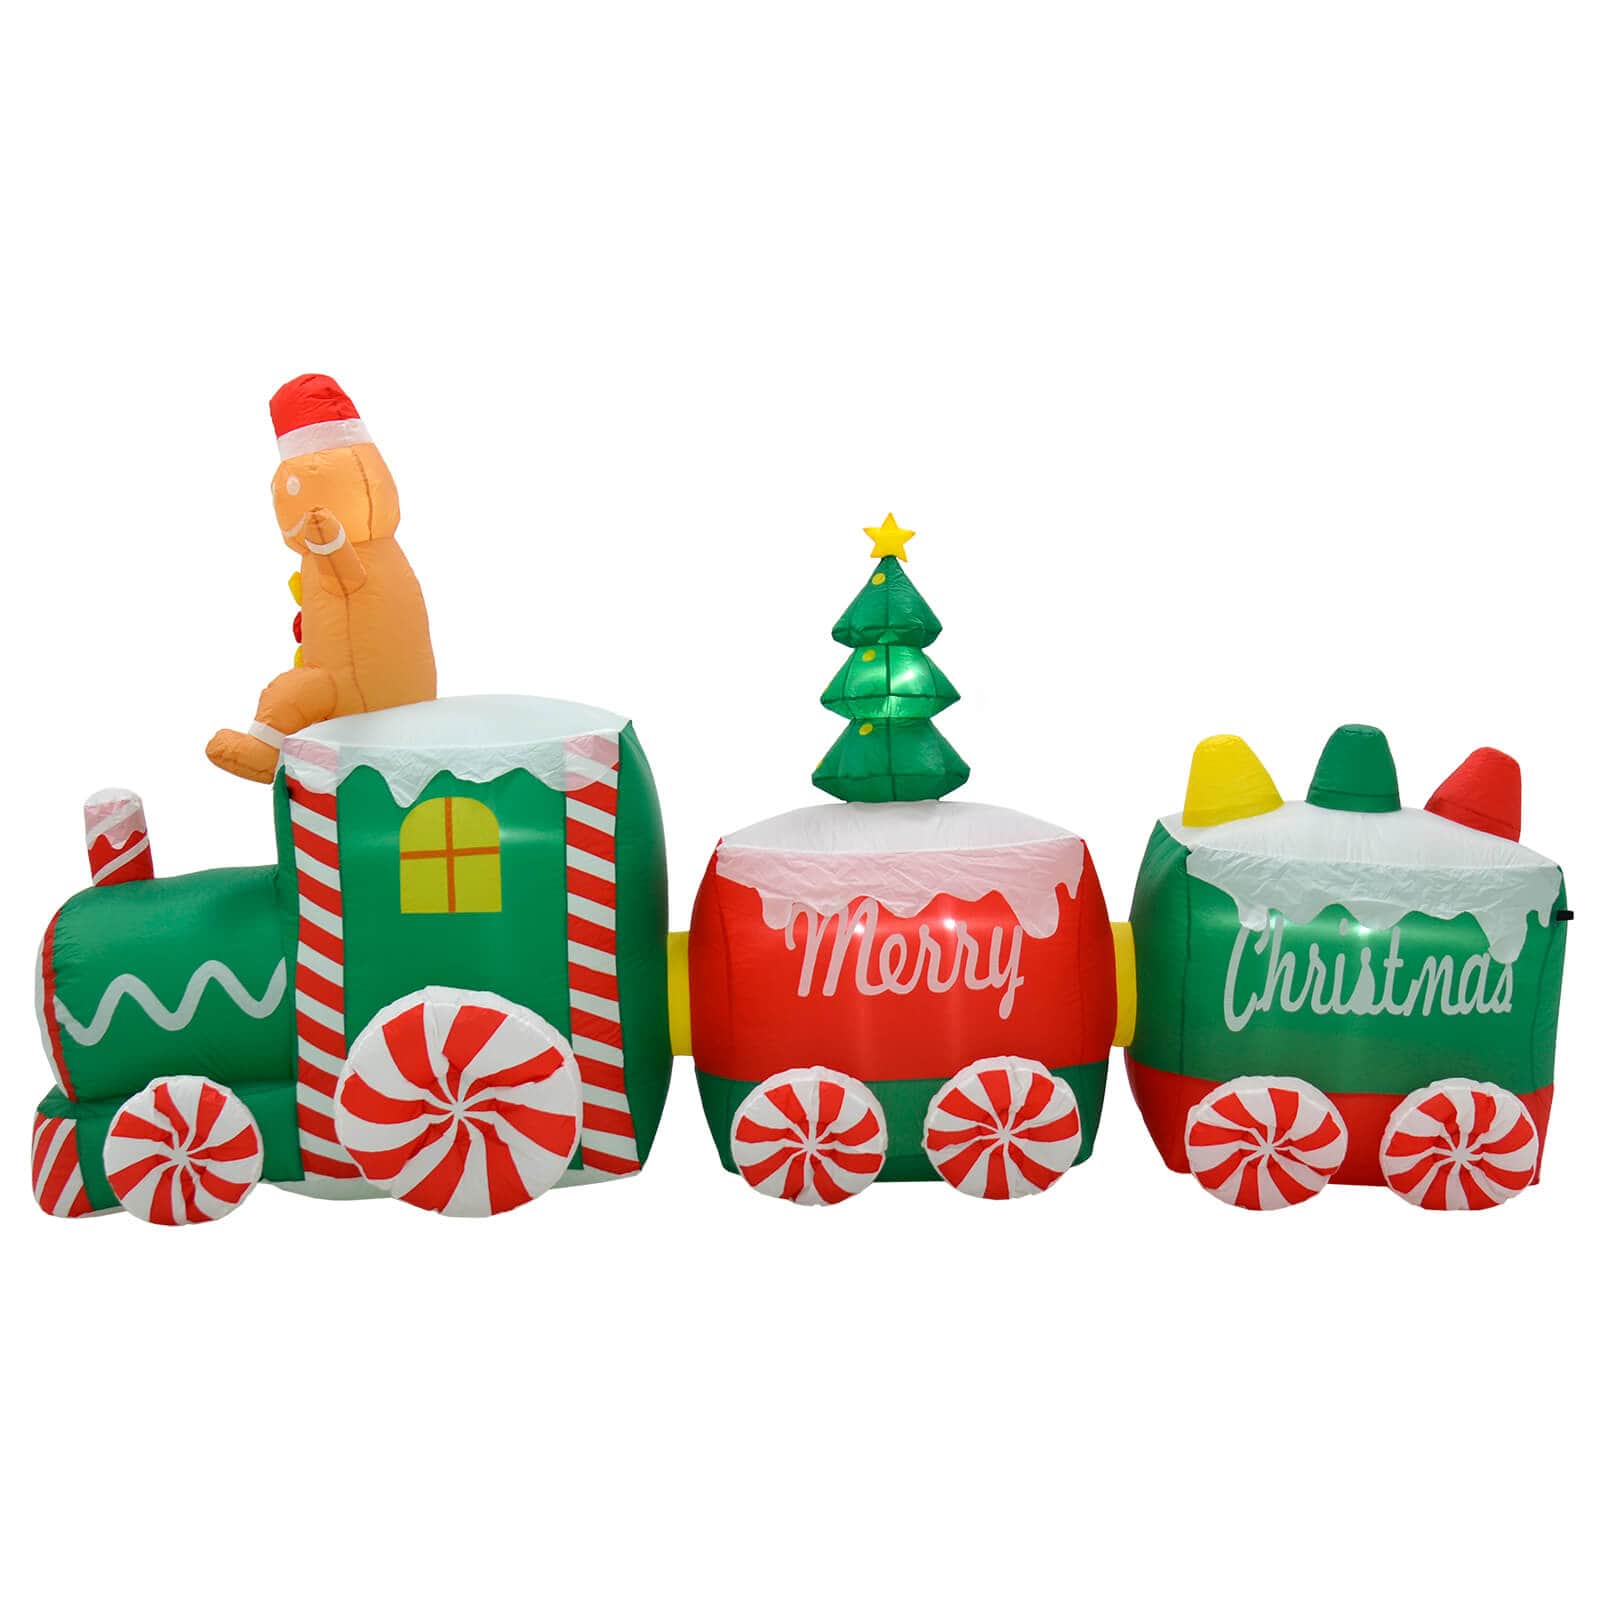 Gingerbread figure on a candy train large Christmas inflatable decoration in green, red and white with Christmas tree and Merry Christmas written on the side 